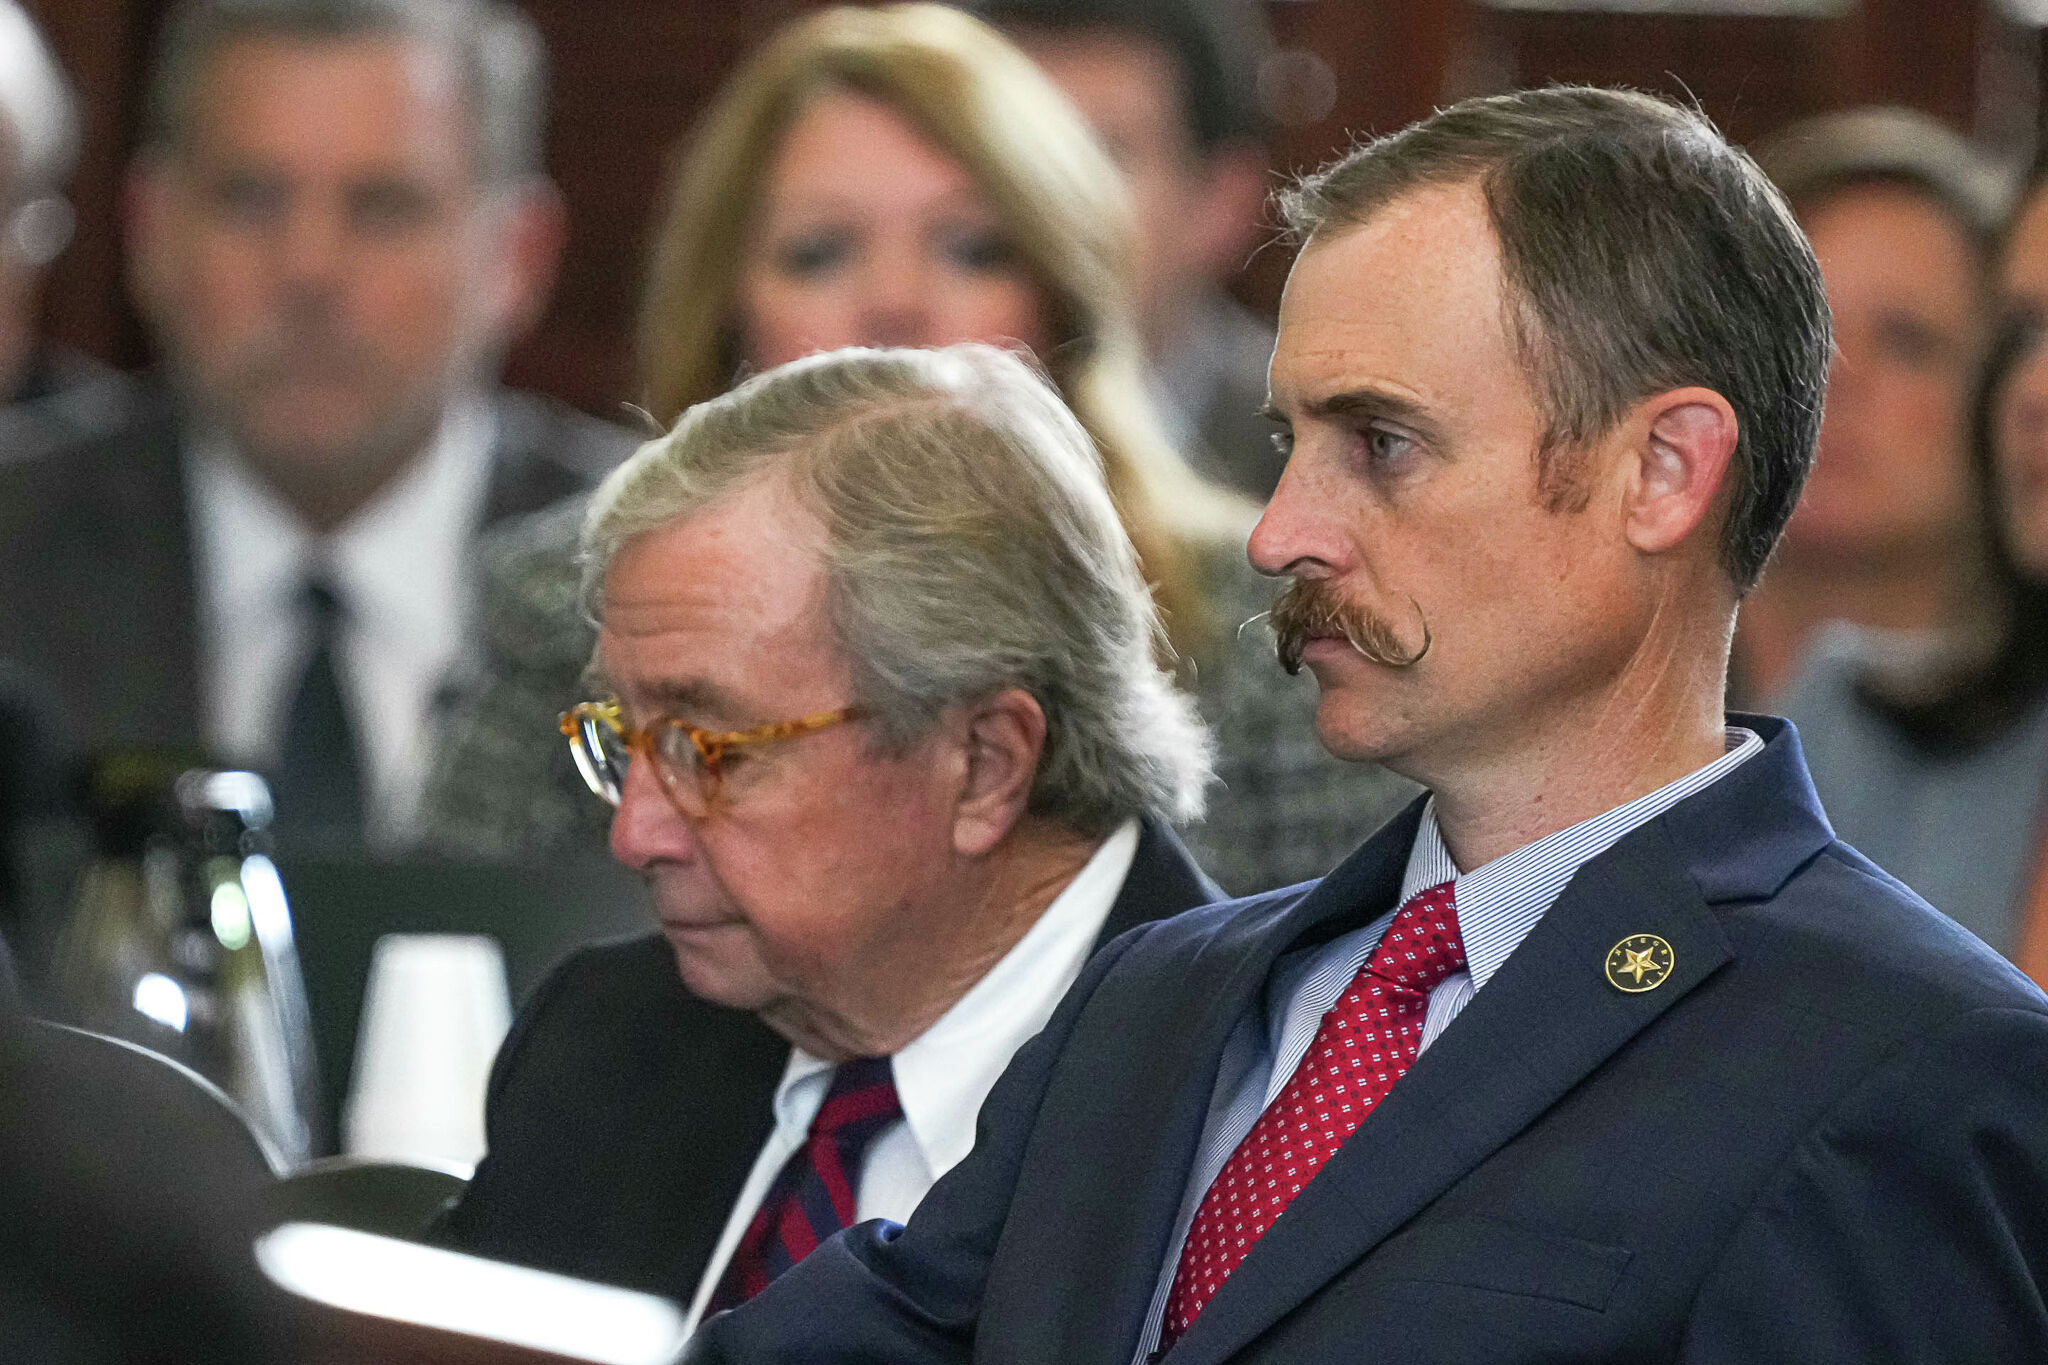 Two House Republicans repent for voting to impeach Ken Paxton